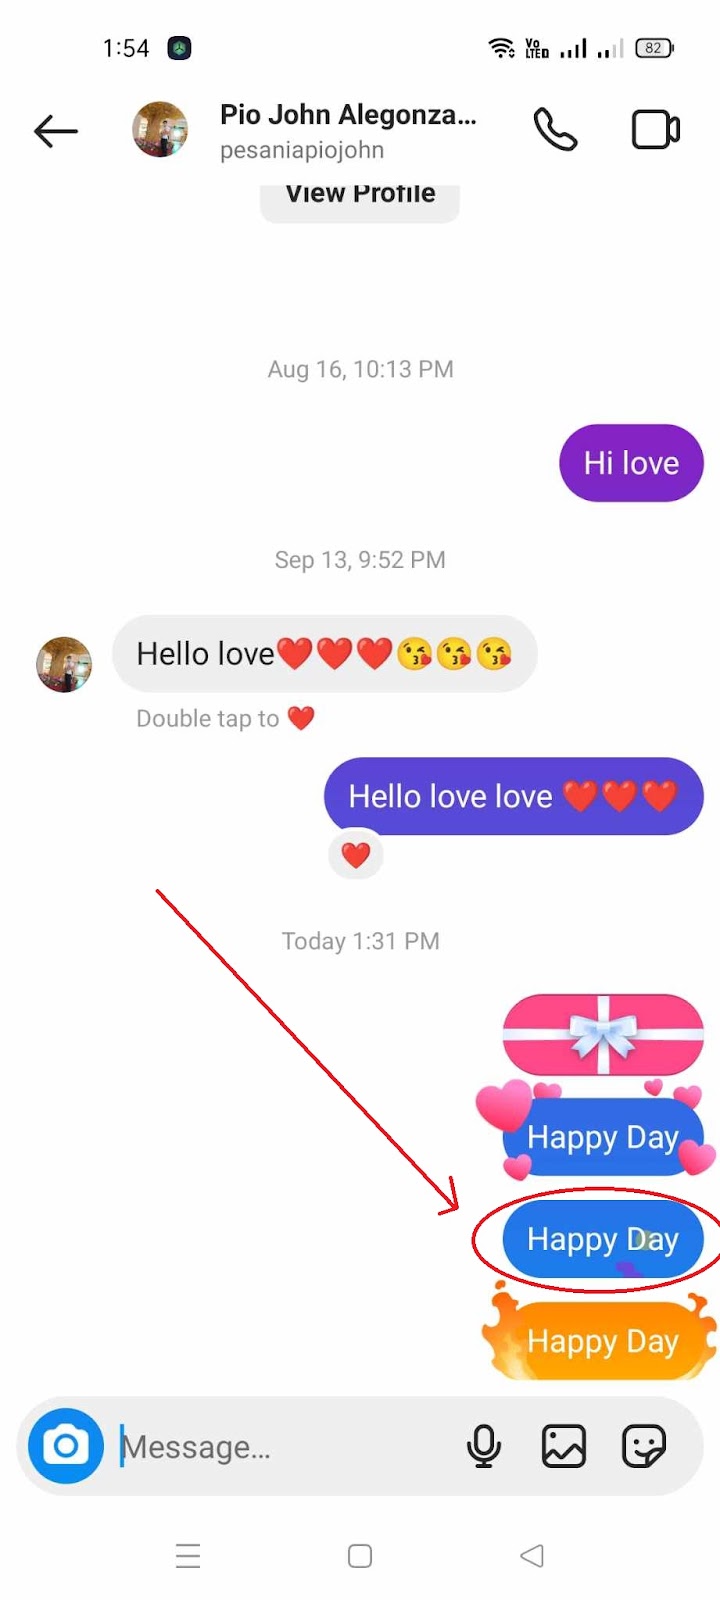 How to Send GIft Messages on Instagram - Celebration Effect